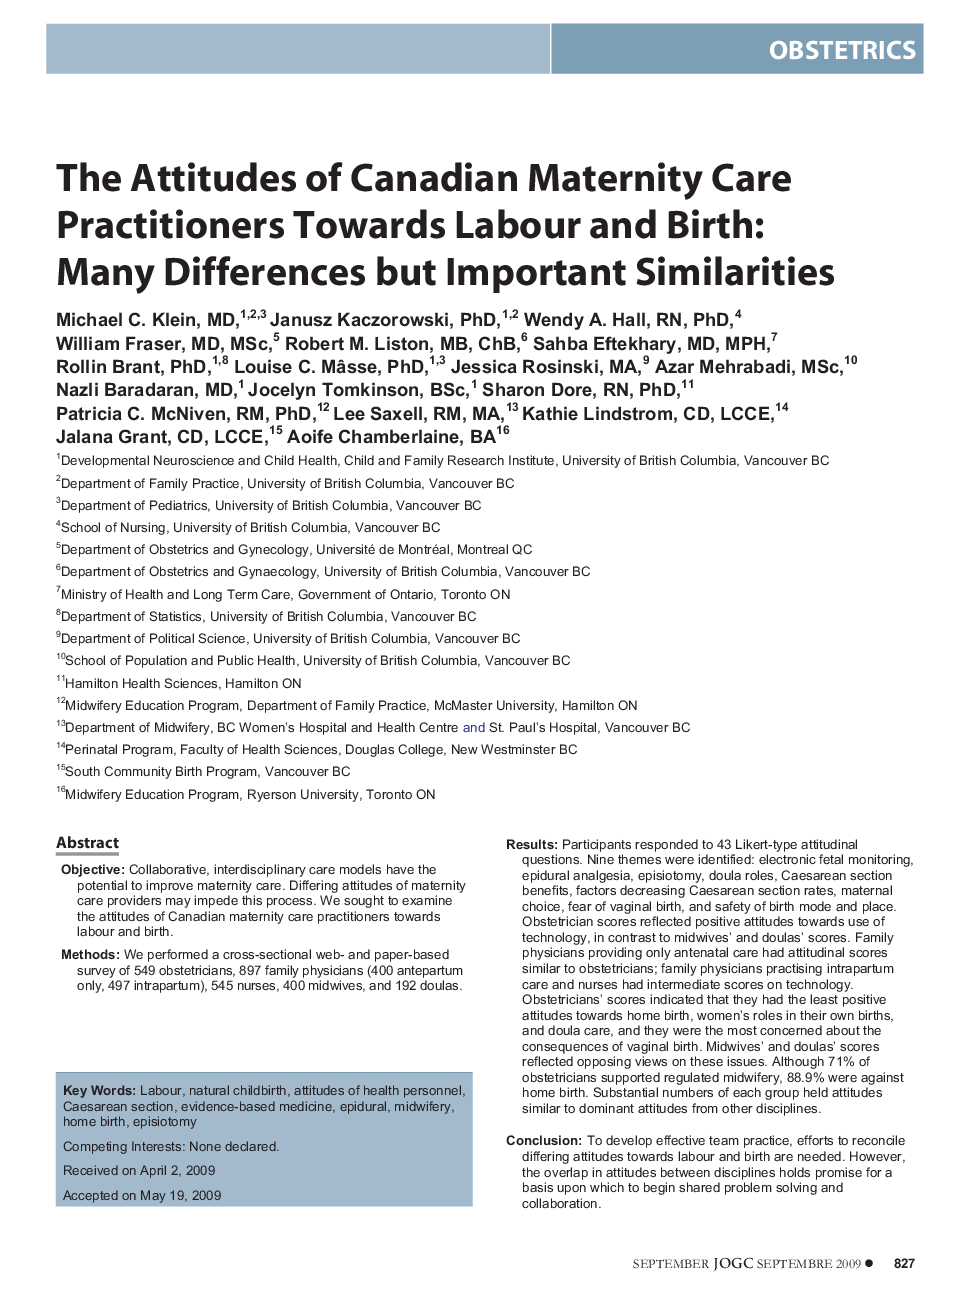 The Attitudes of Canadian Maternity Care Practitioners Towards Labour and Birth: Many Differences but Important Similarities